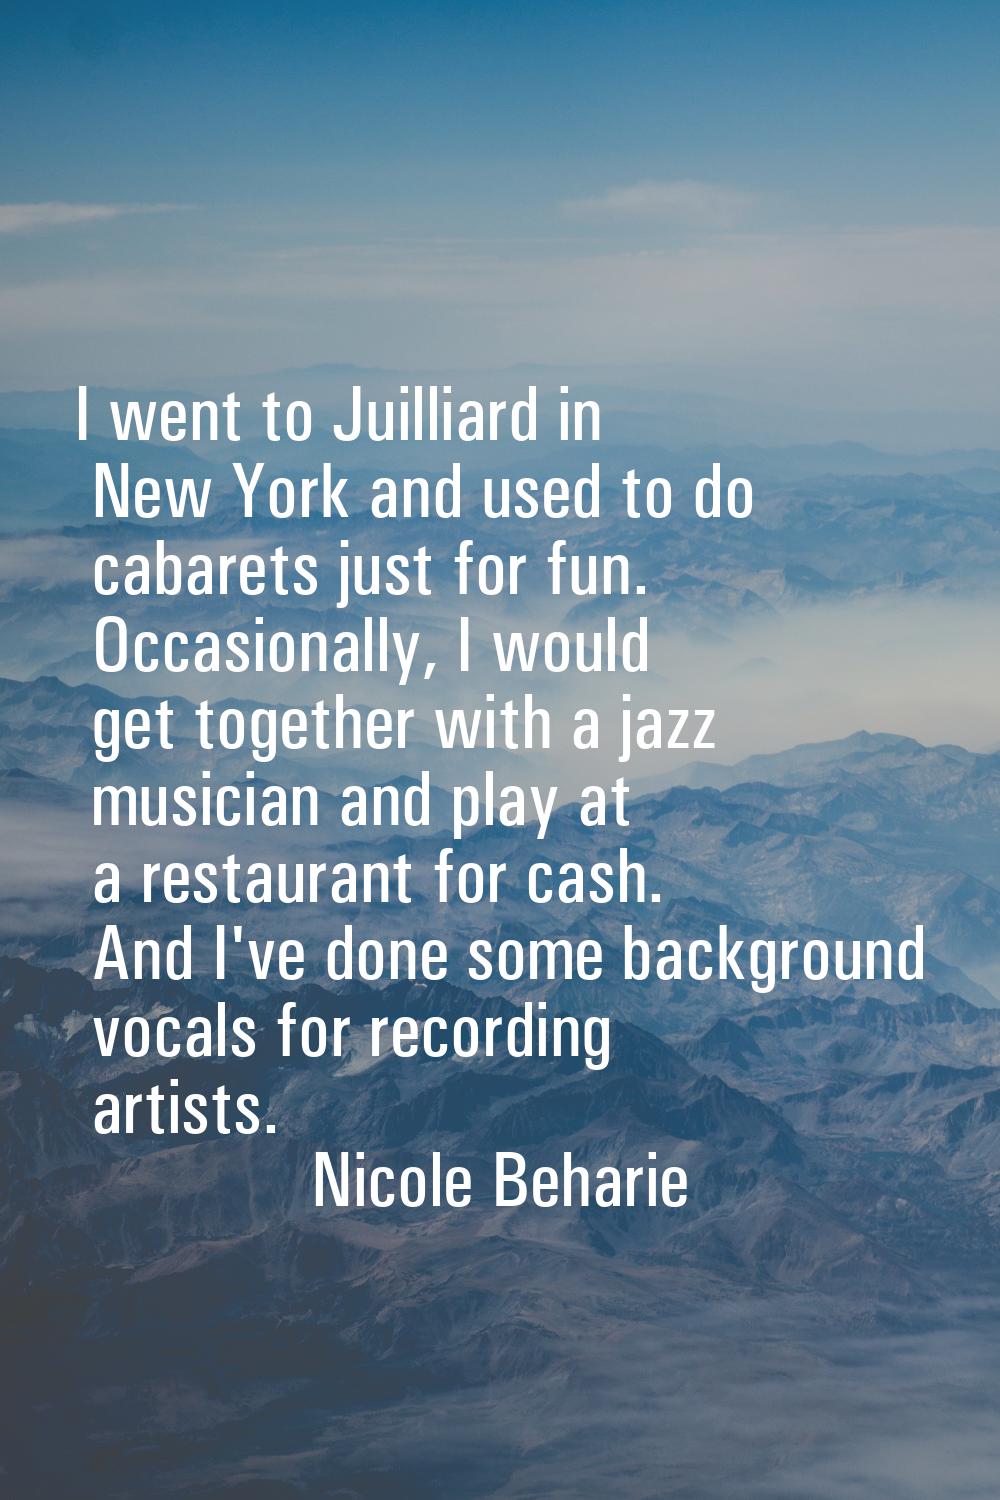 I went to Juilliard in New York and used to do cabarets just for fun. Occasionally, I would get tog